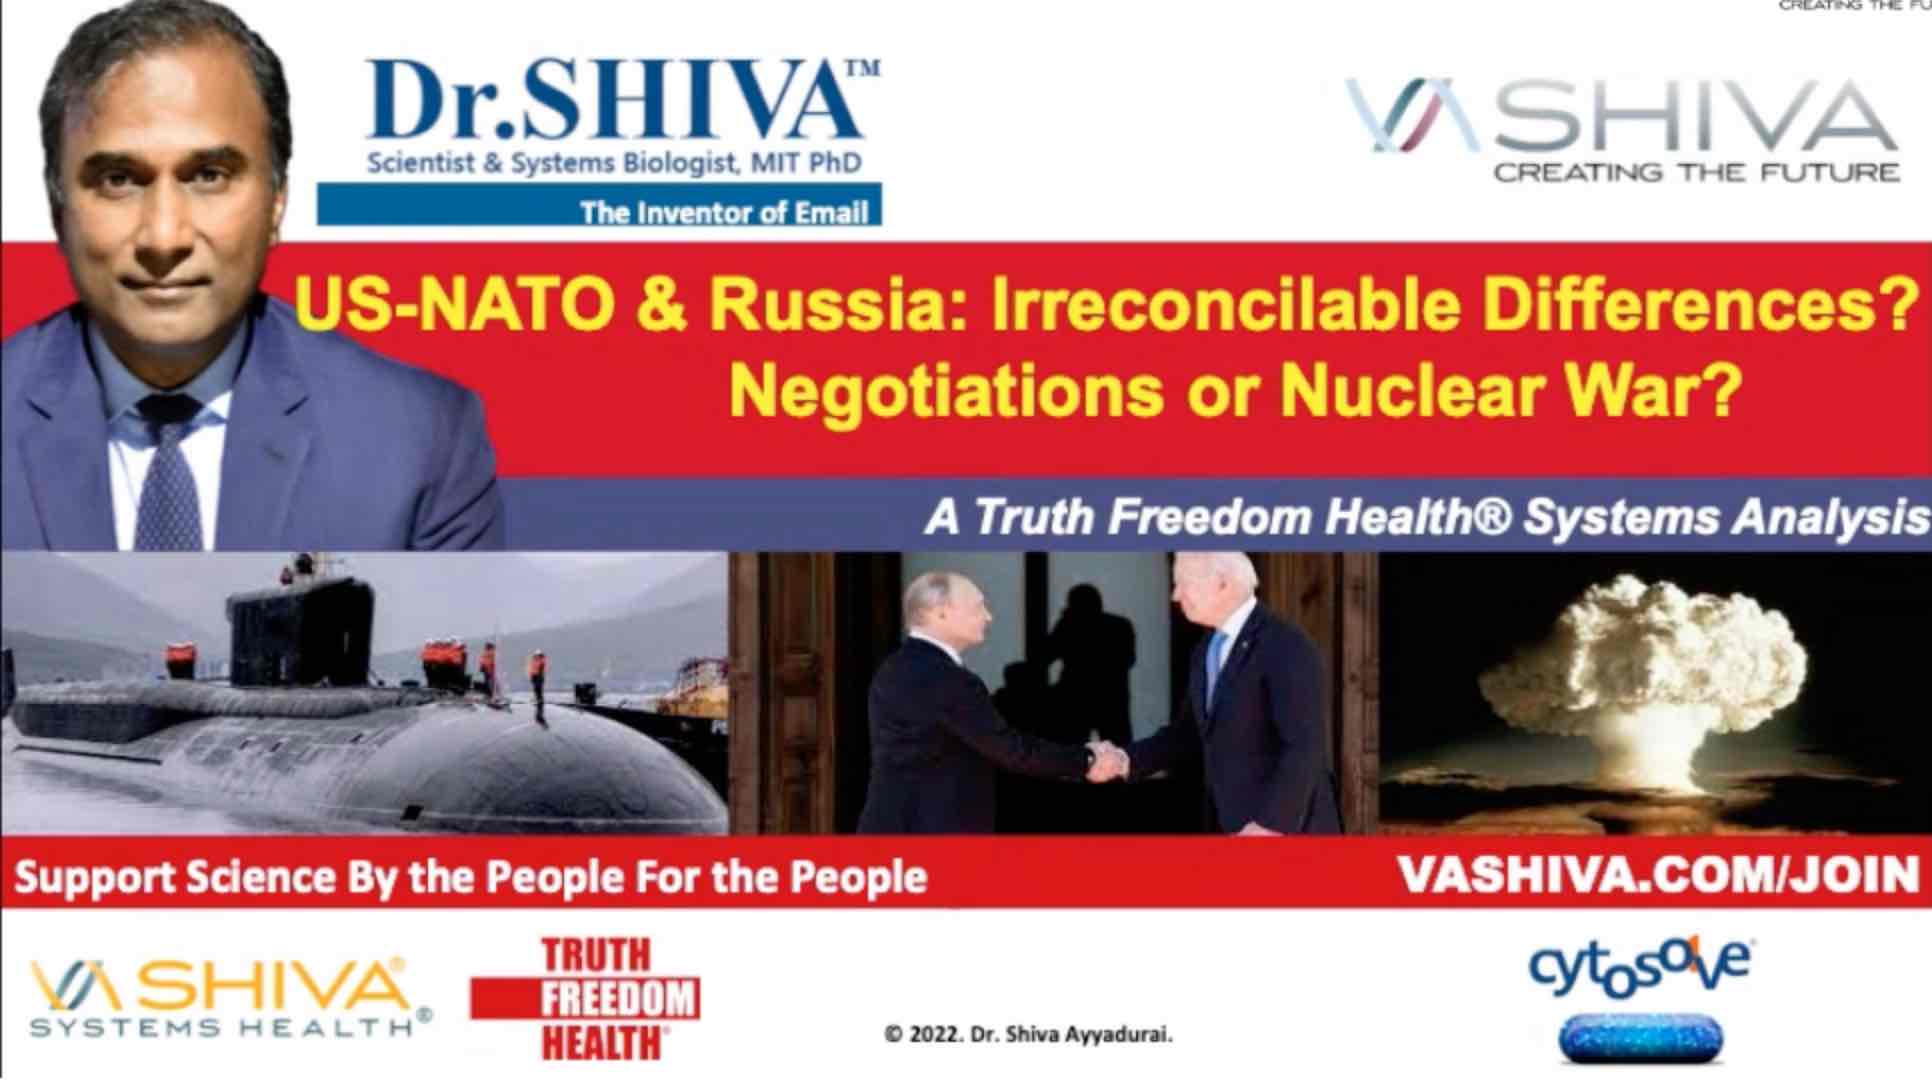 Dr.SHIVA LIVE: US-NATO & Russia: Irreconcilable Differences? Negotiations or Nuclear War?